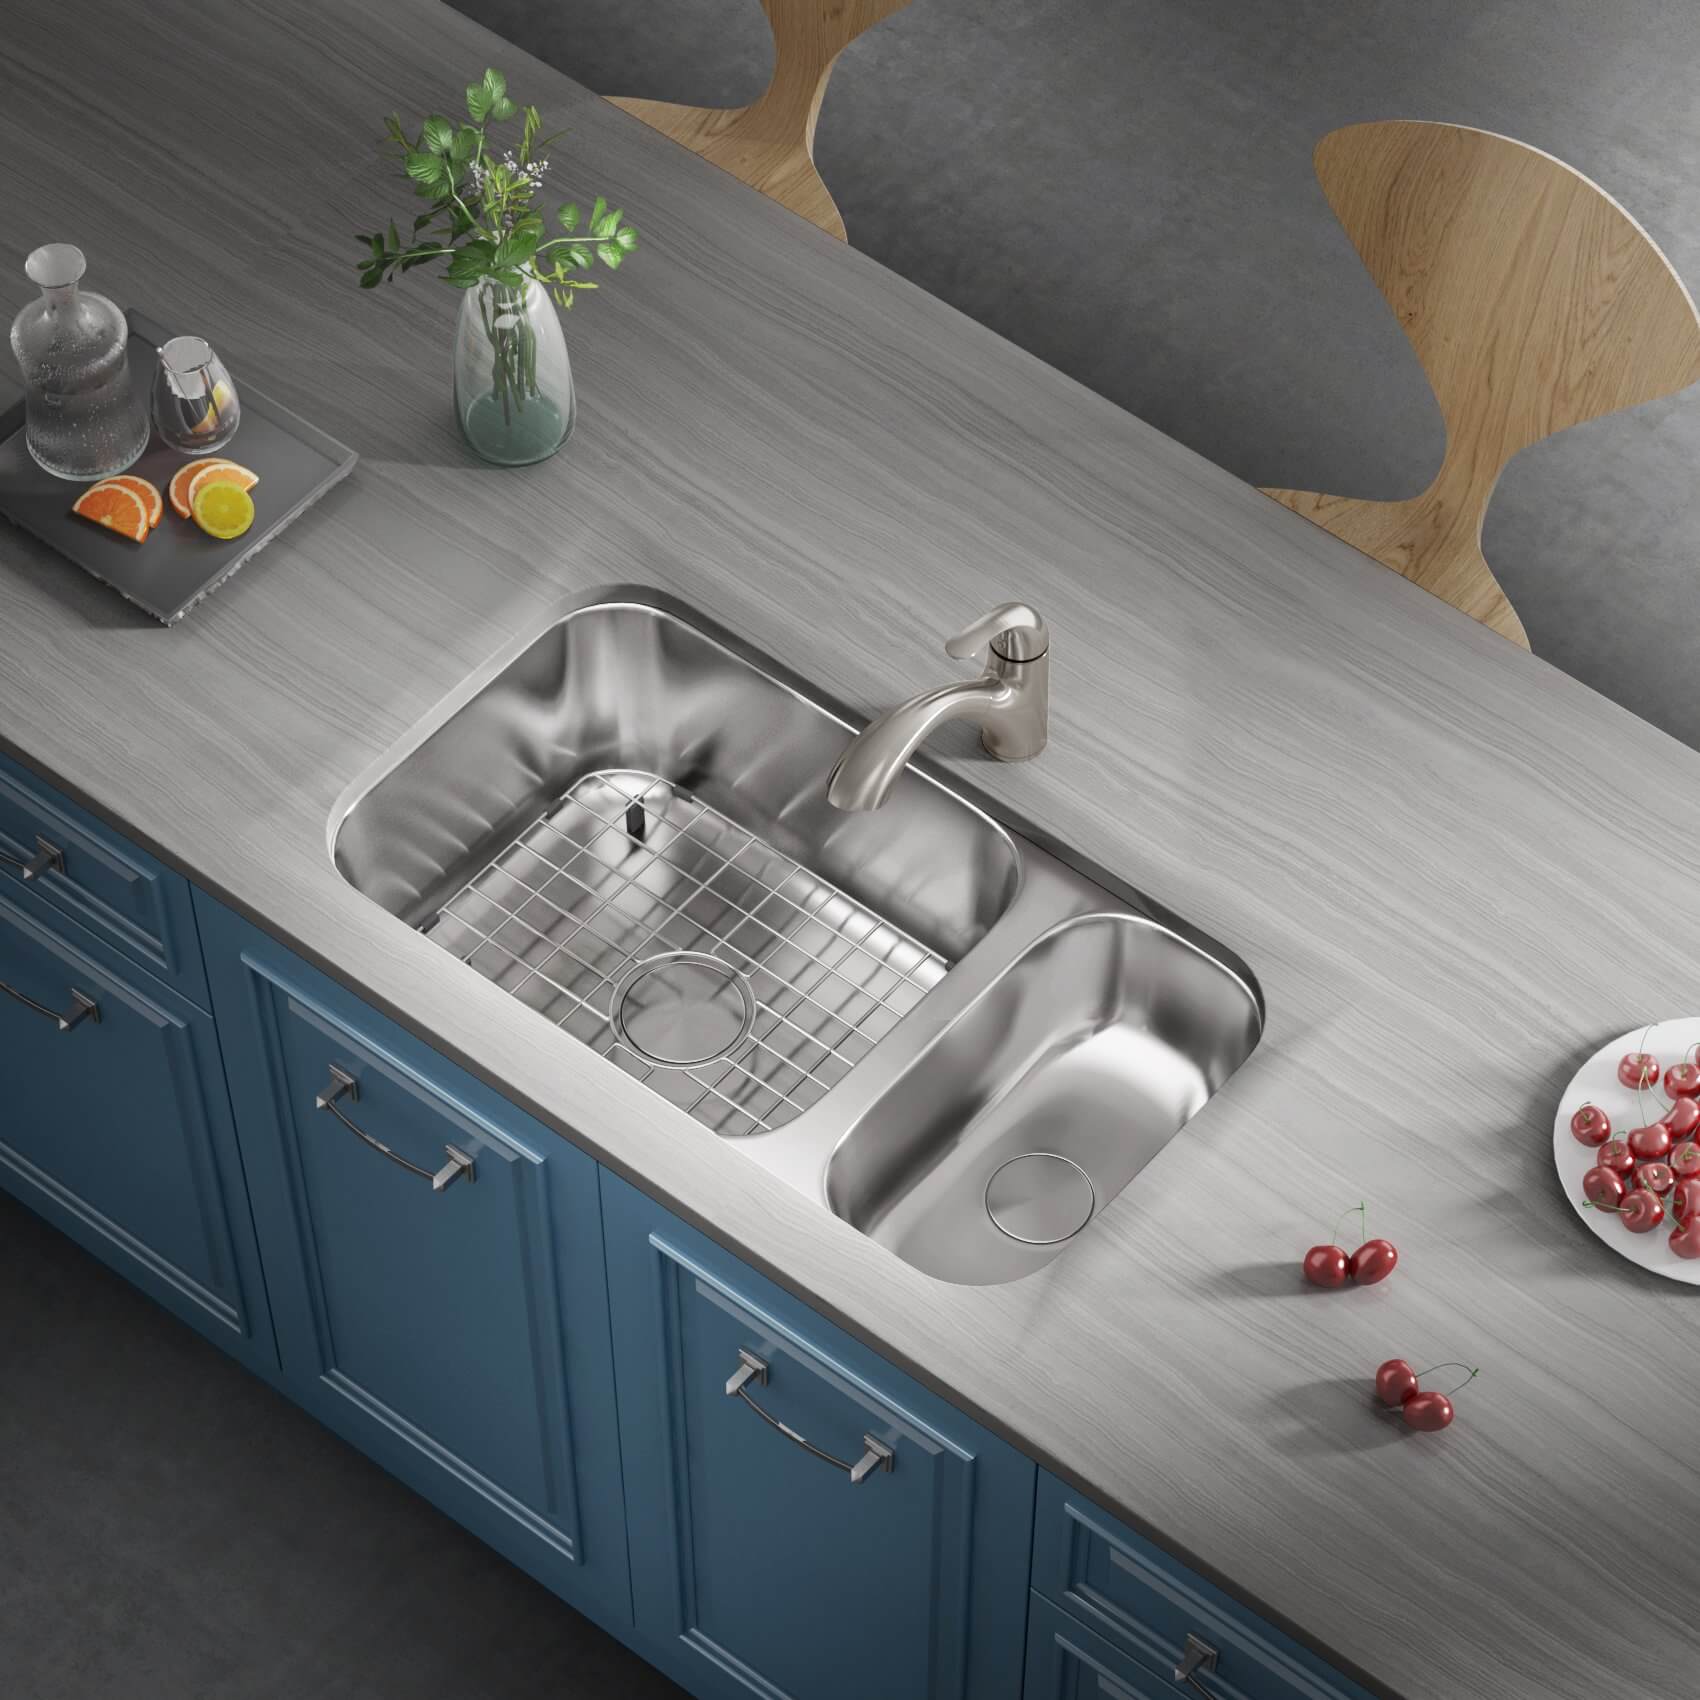 Allora's kitchen faucet is mounted on Undermount Double Down Stainless Steel Kitchen Sink